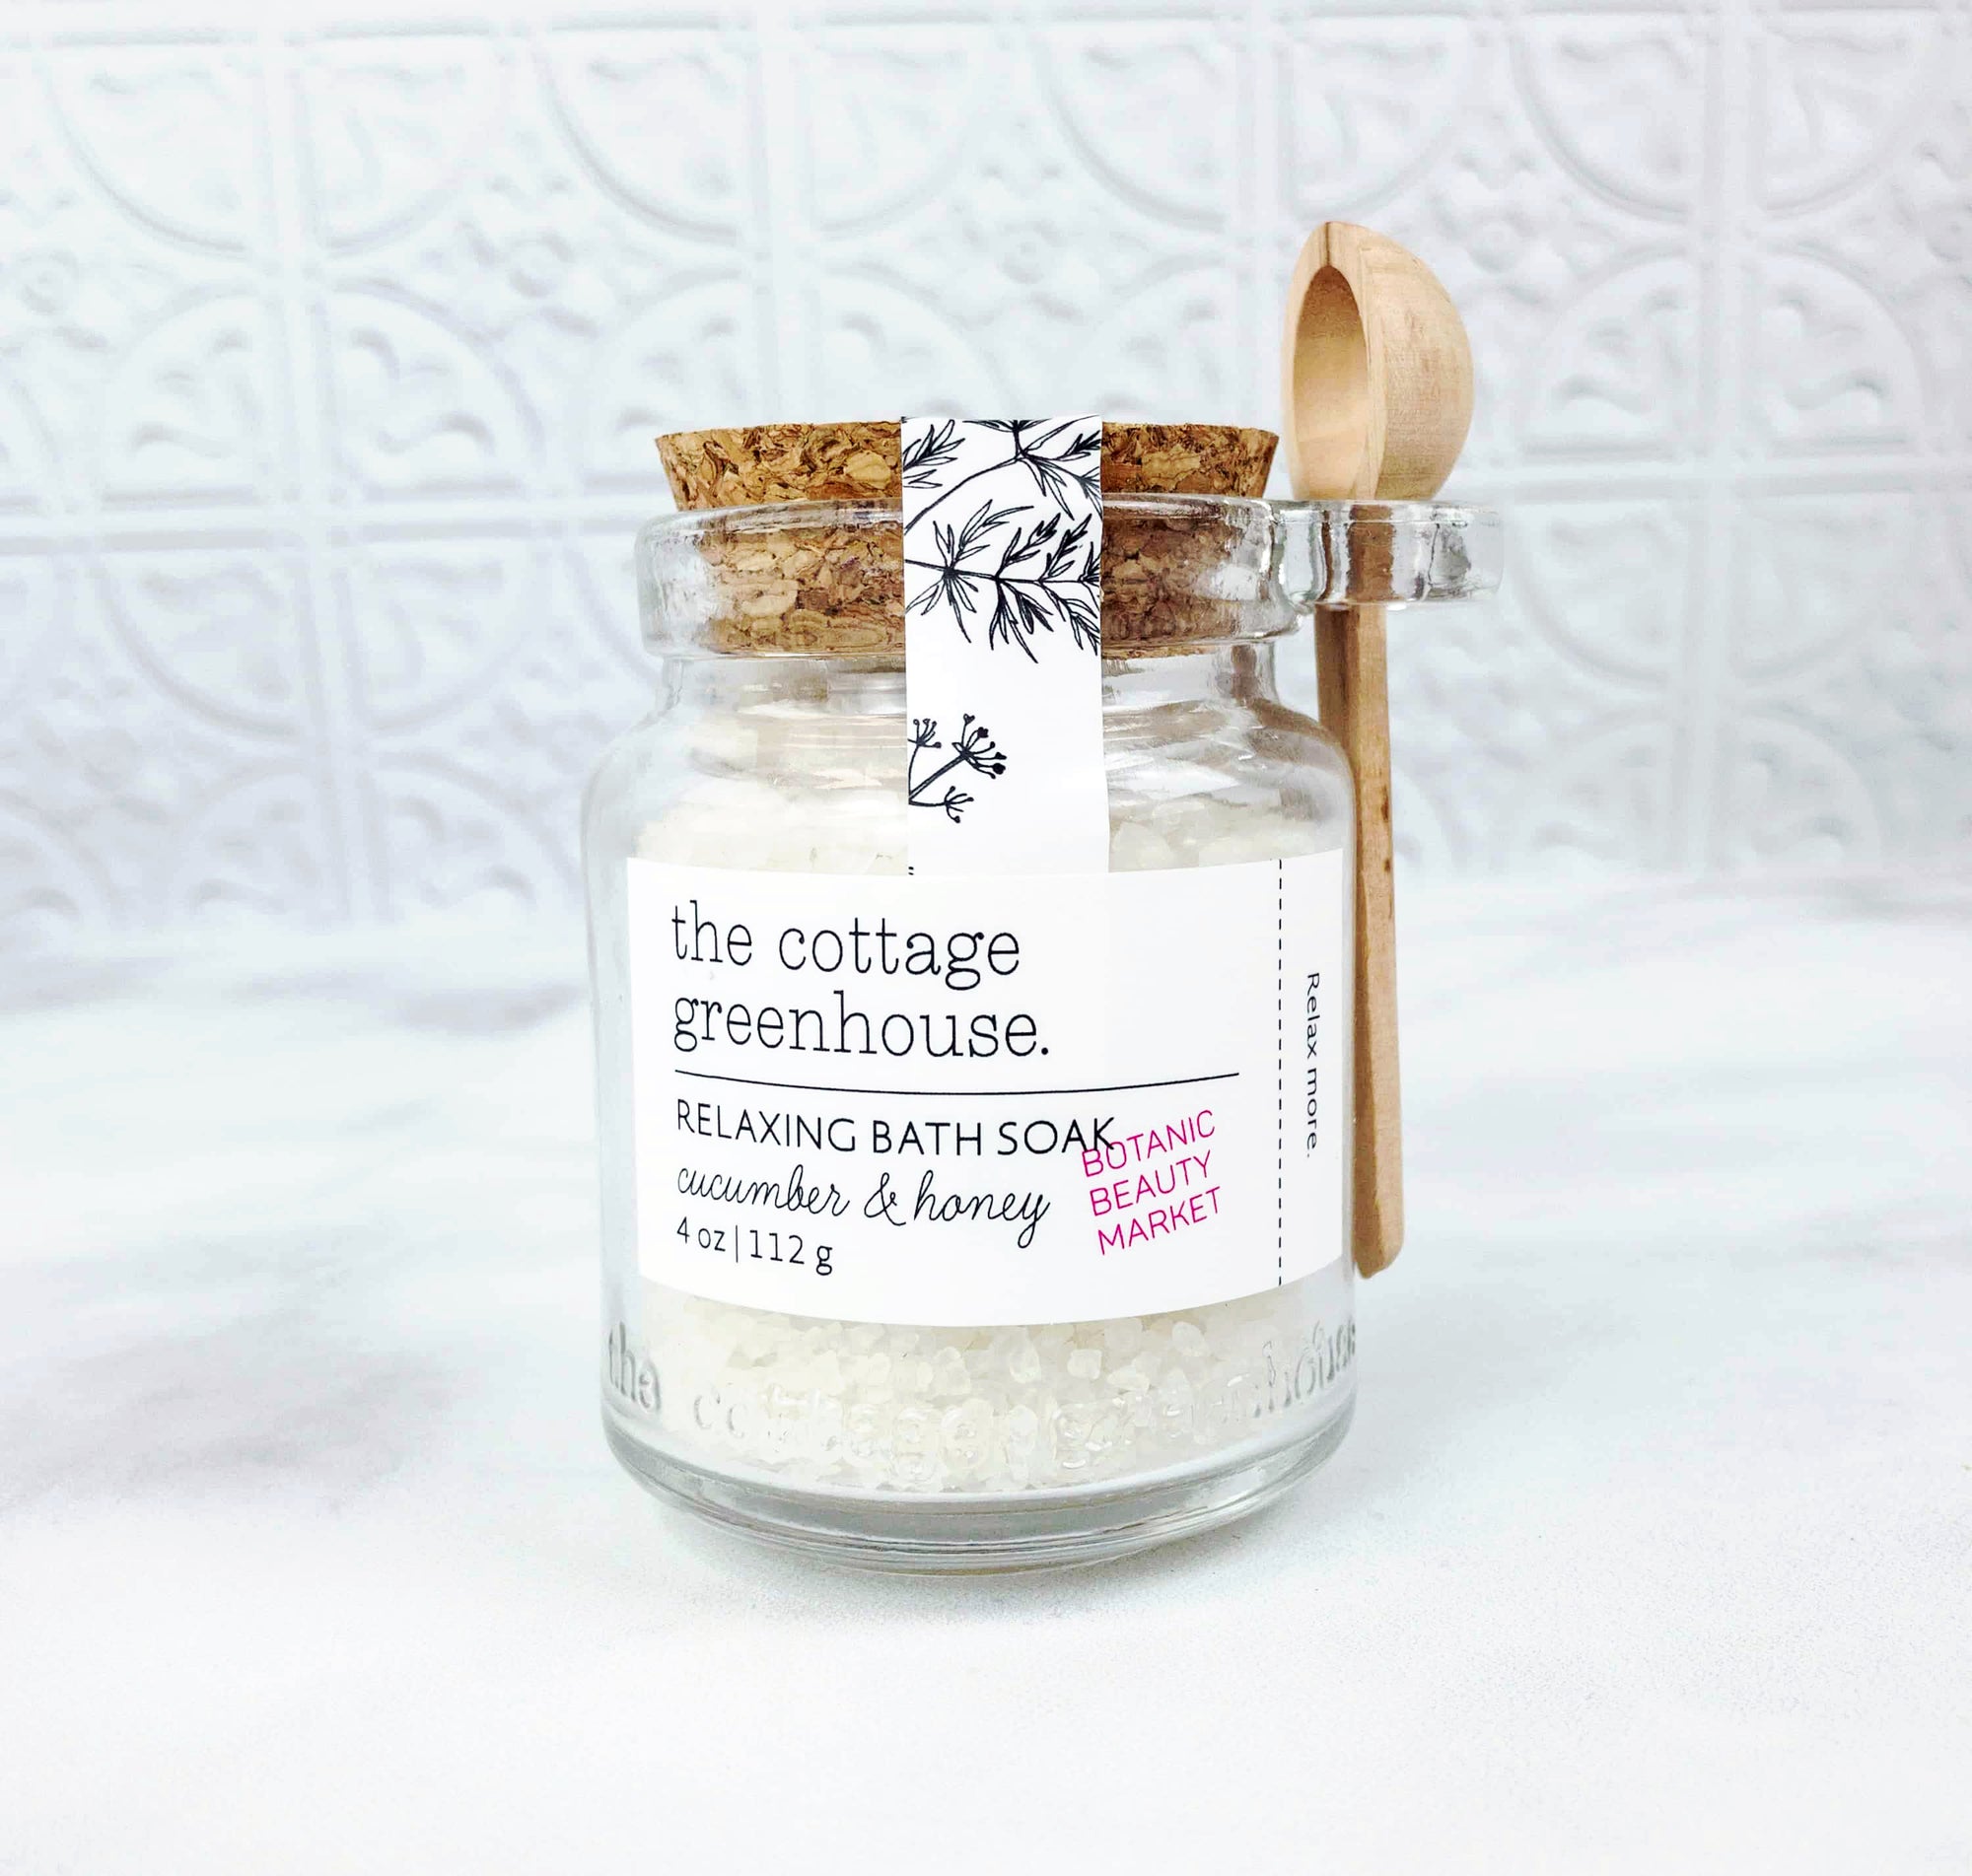 The Cottage Greenhouse Cucumber and Honey Relaxing Bath Soak Salts